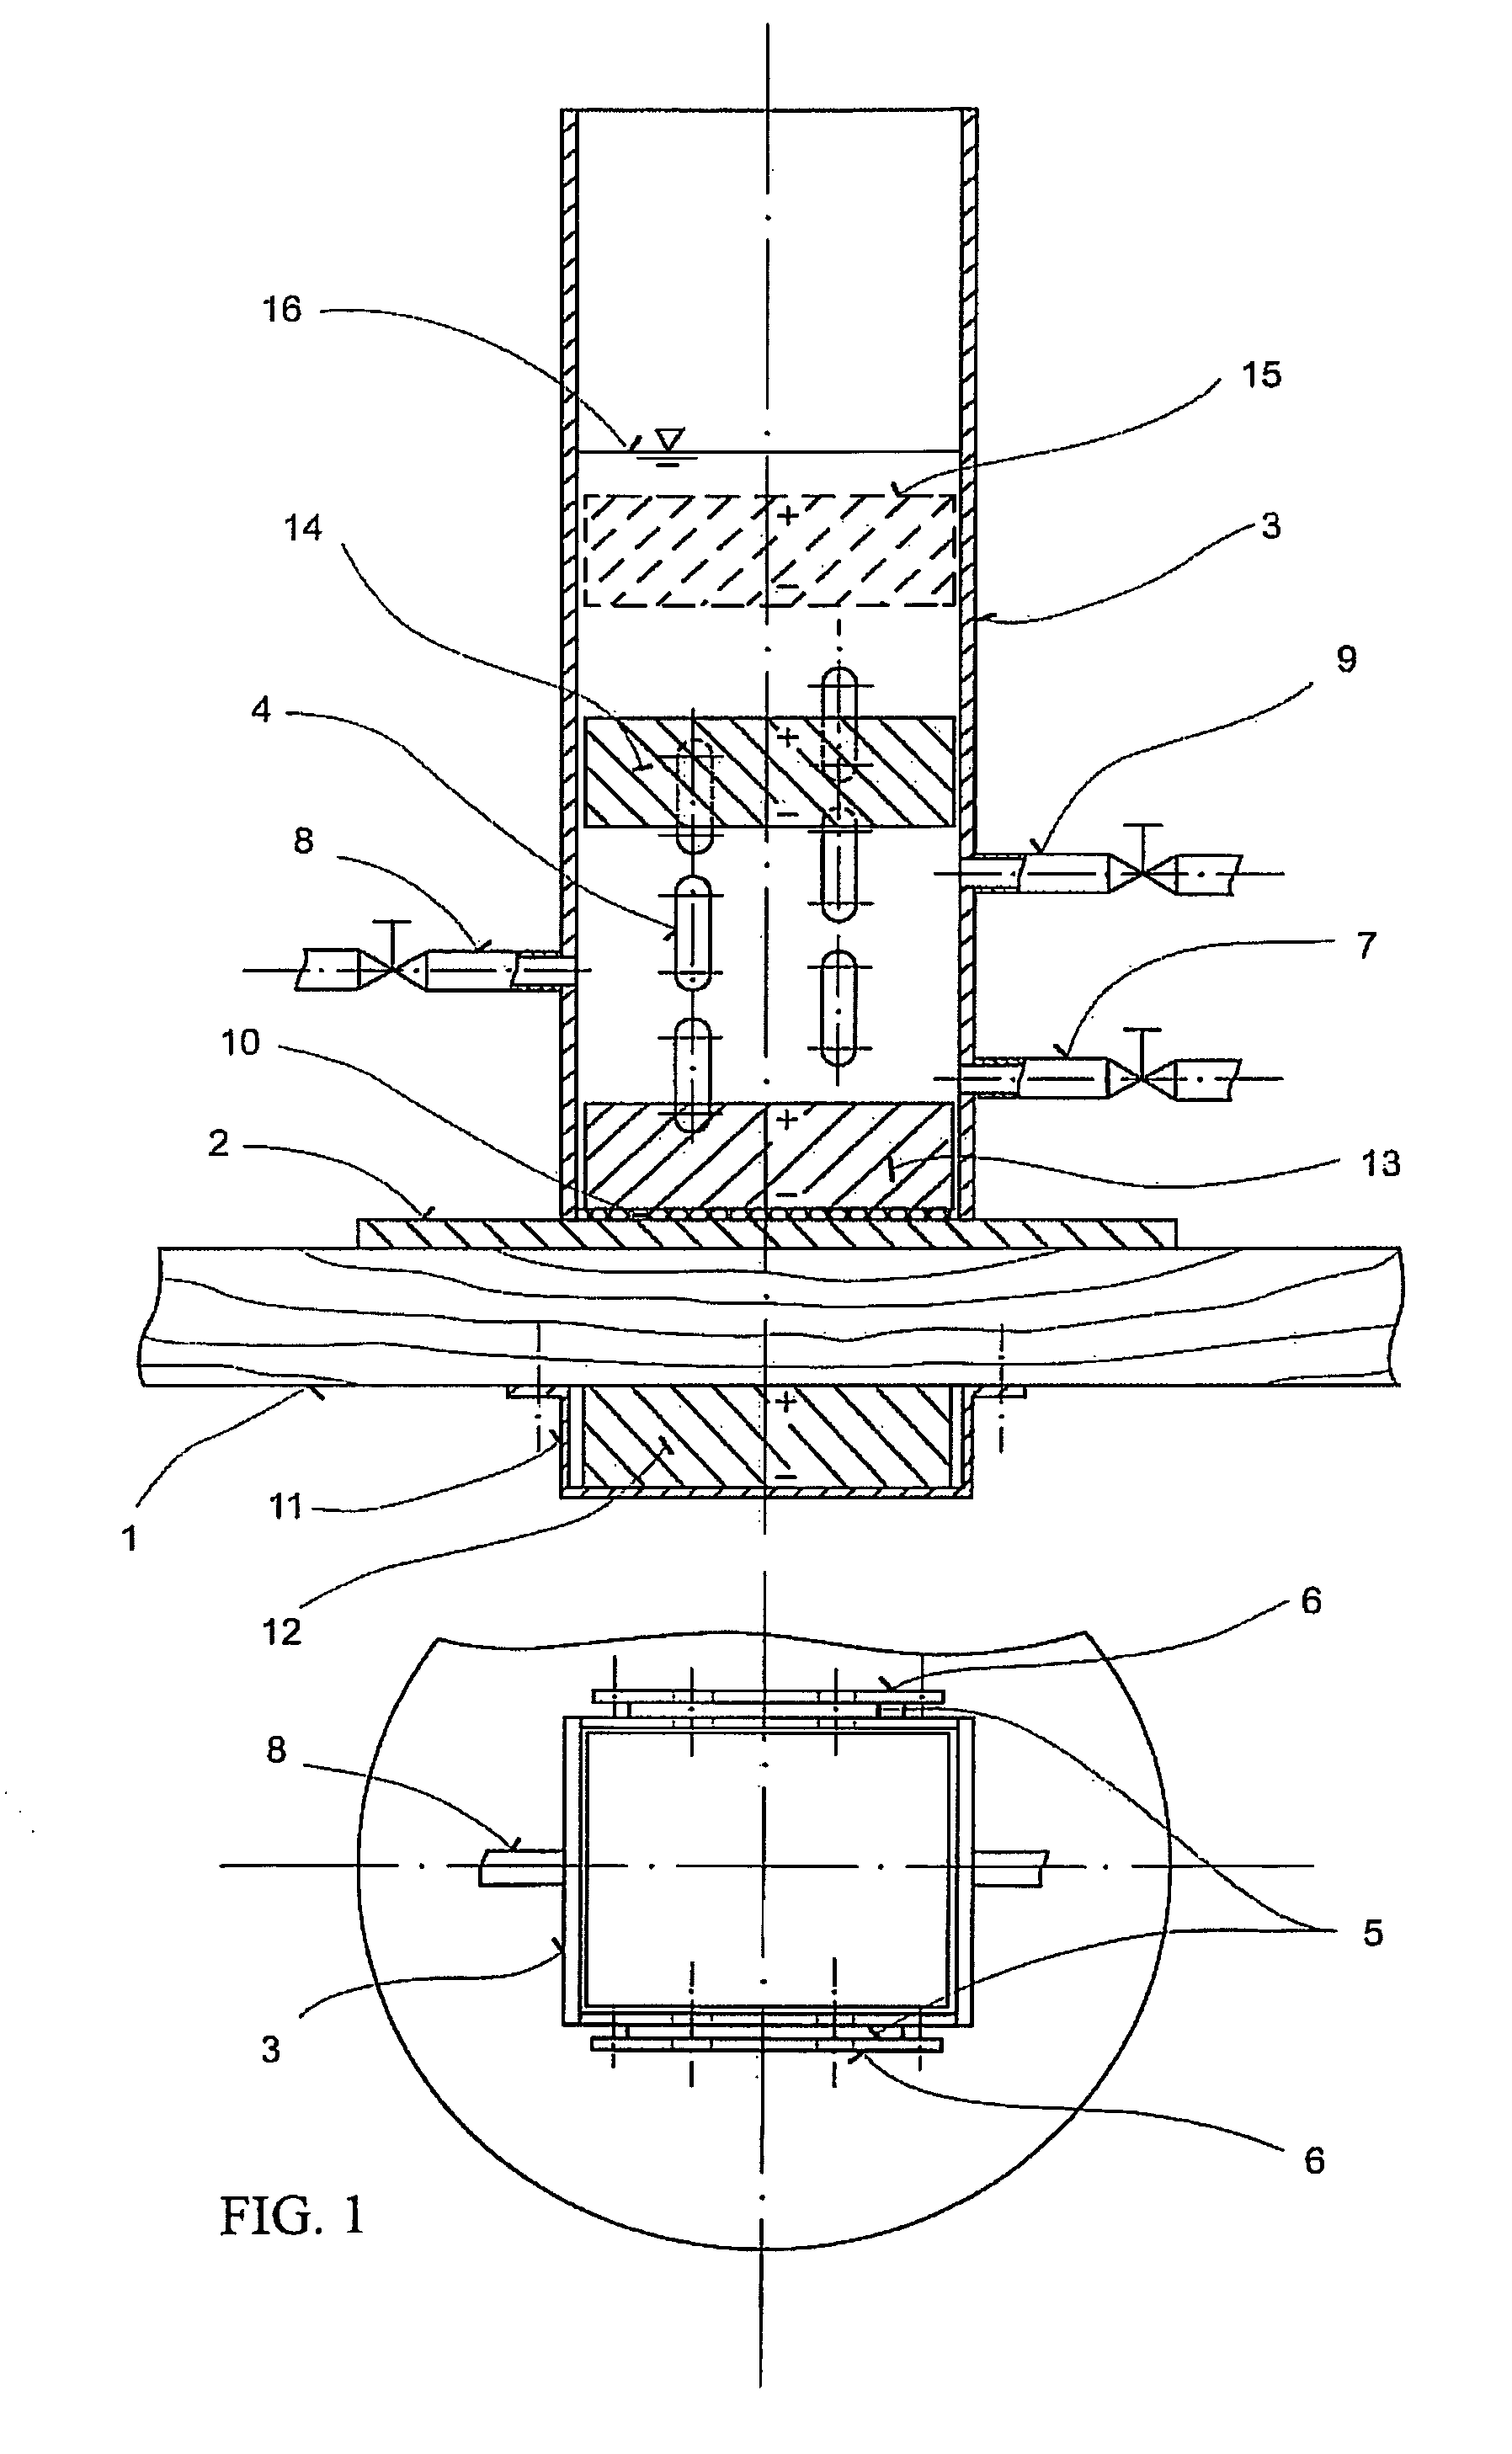 Method of forming magnetic blocks and equipment for carrying out that method